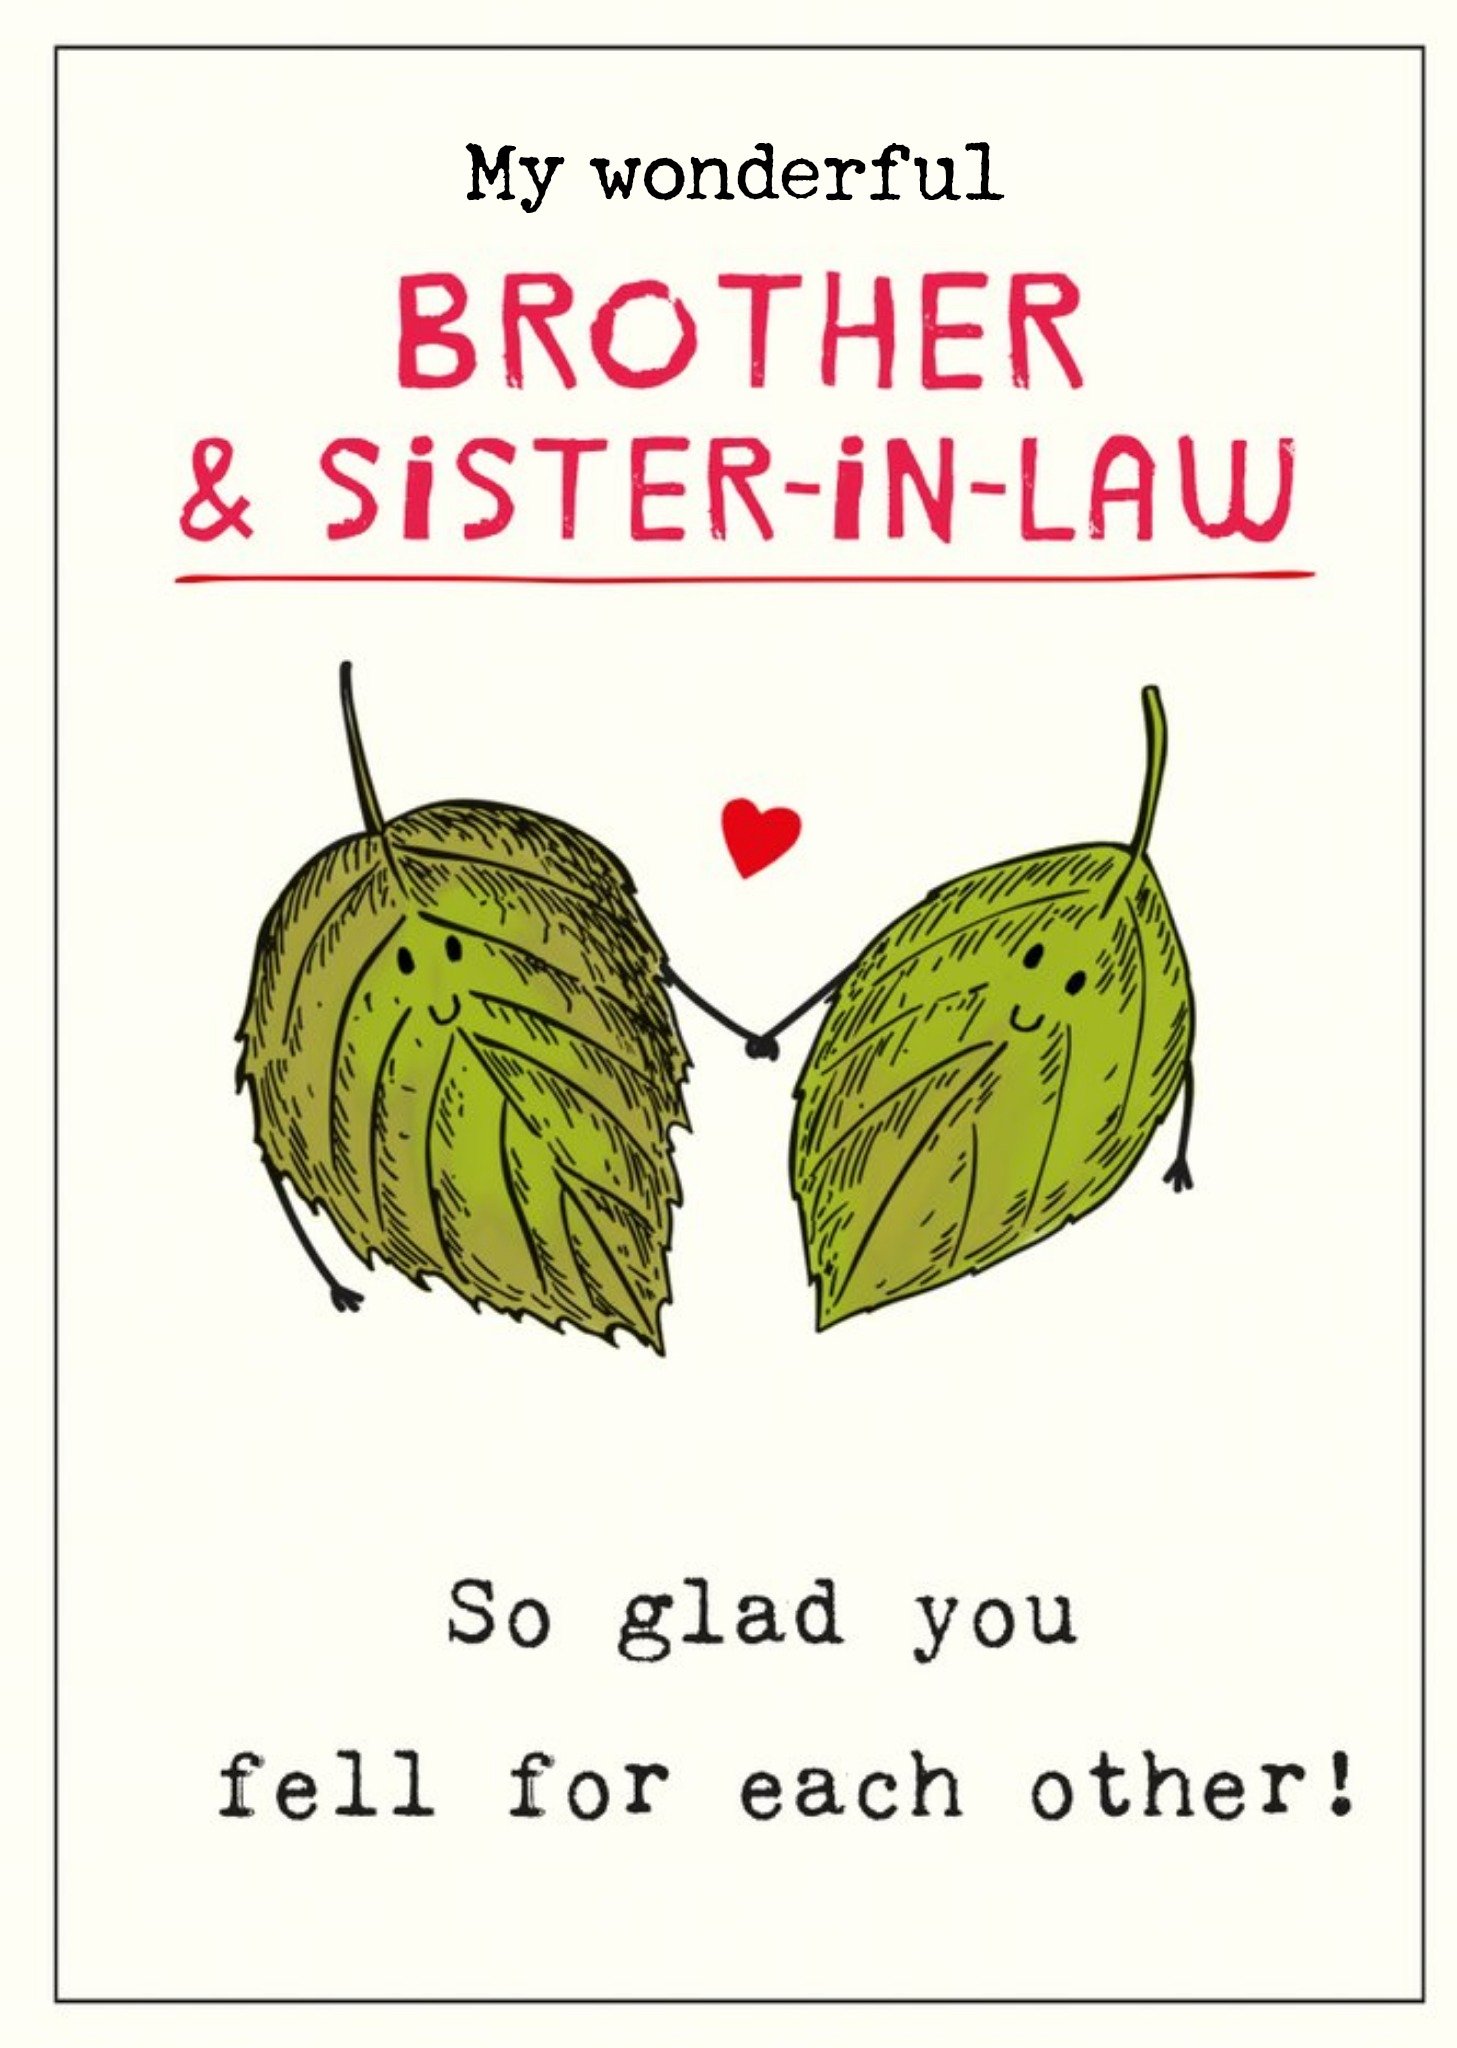 Moonpig Cute Illustrative Smiling Leaves Brother & Sister-In-Law Anniversary Card Ecard